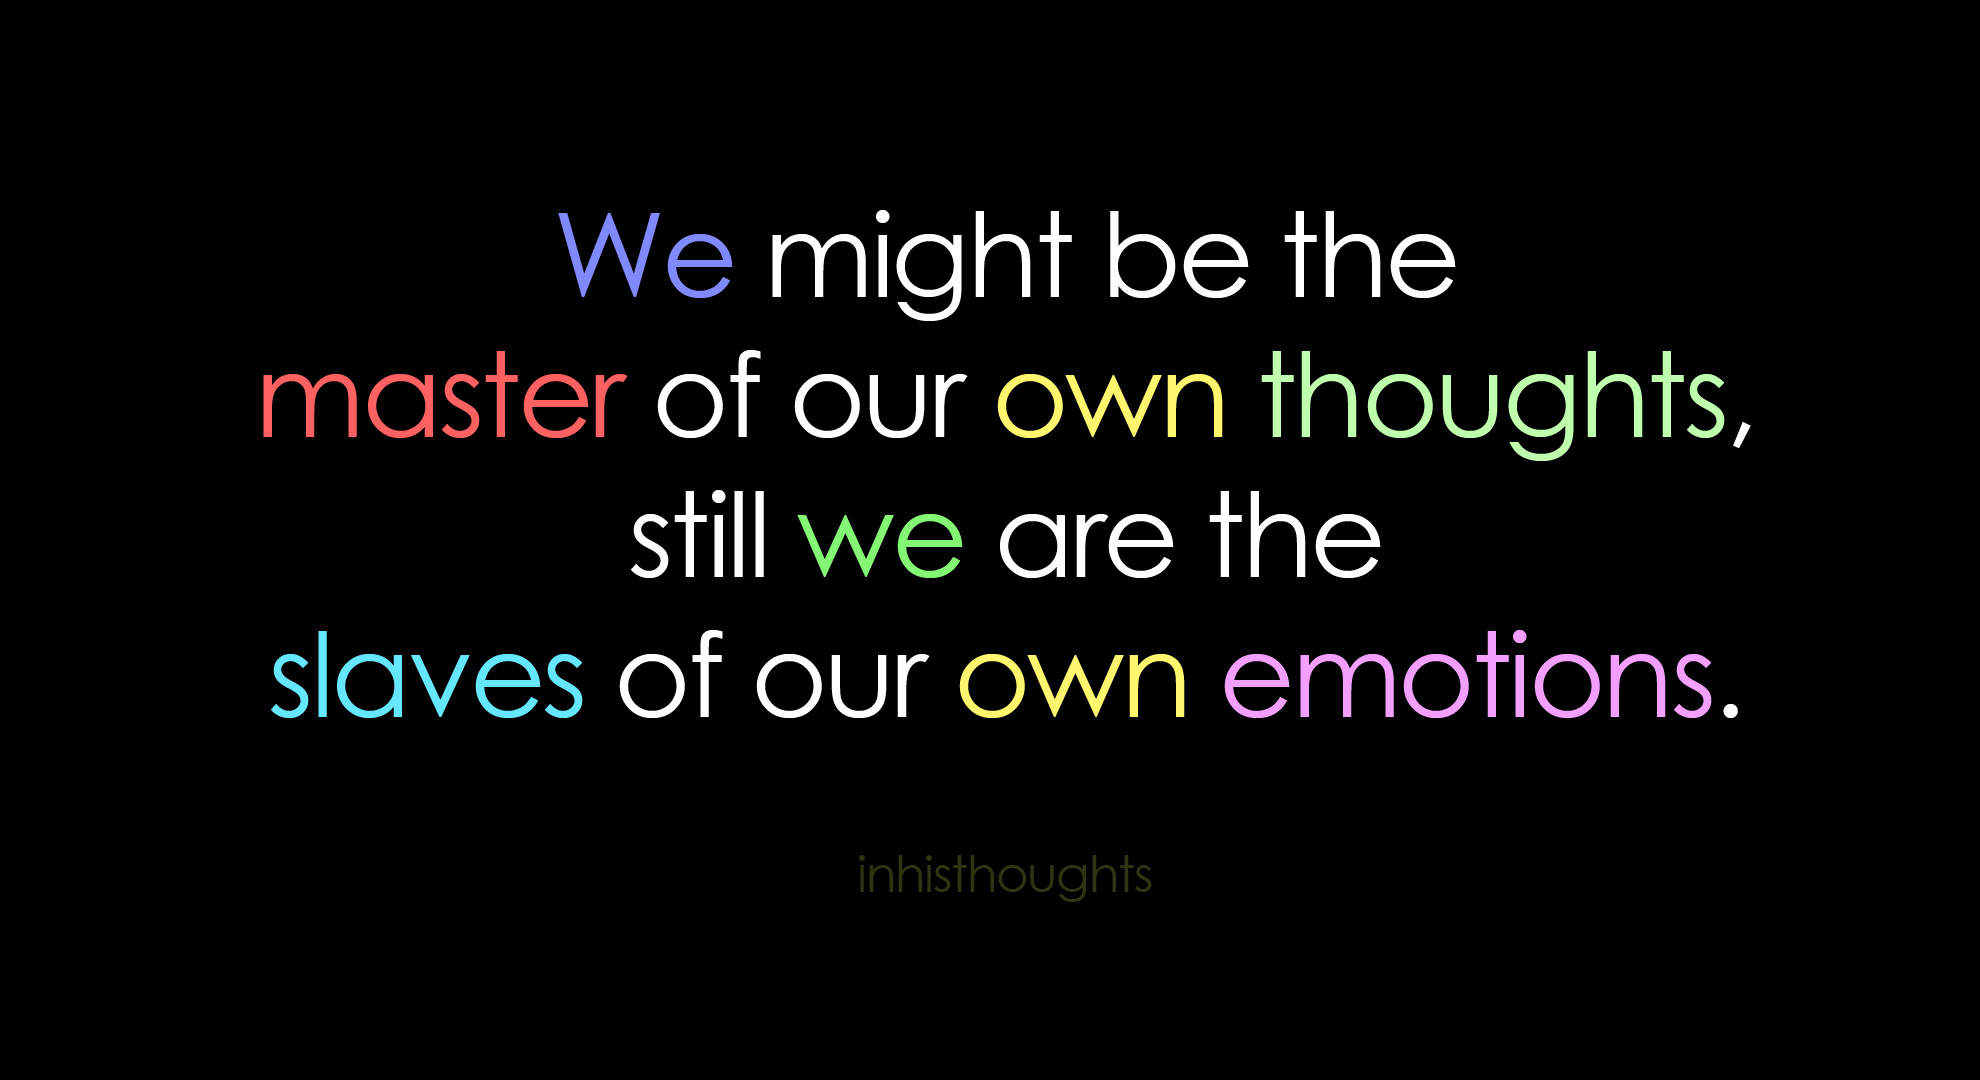 We might be the master of our own thoughts, still we are the slaves of our own emotions.